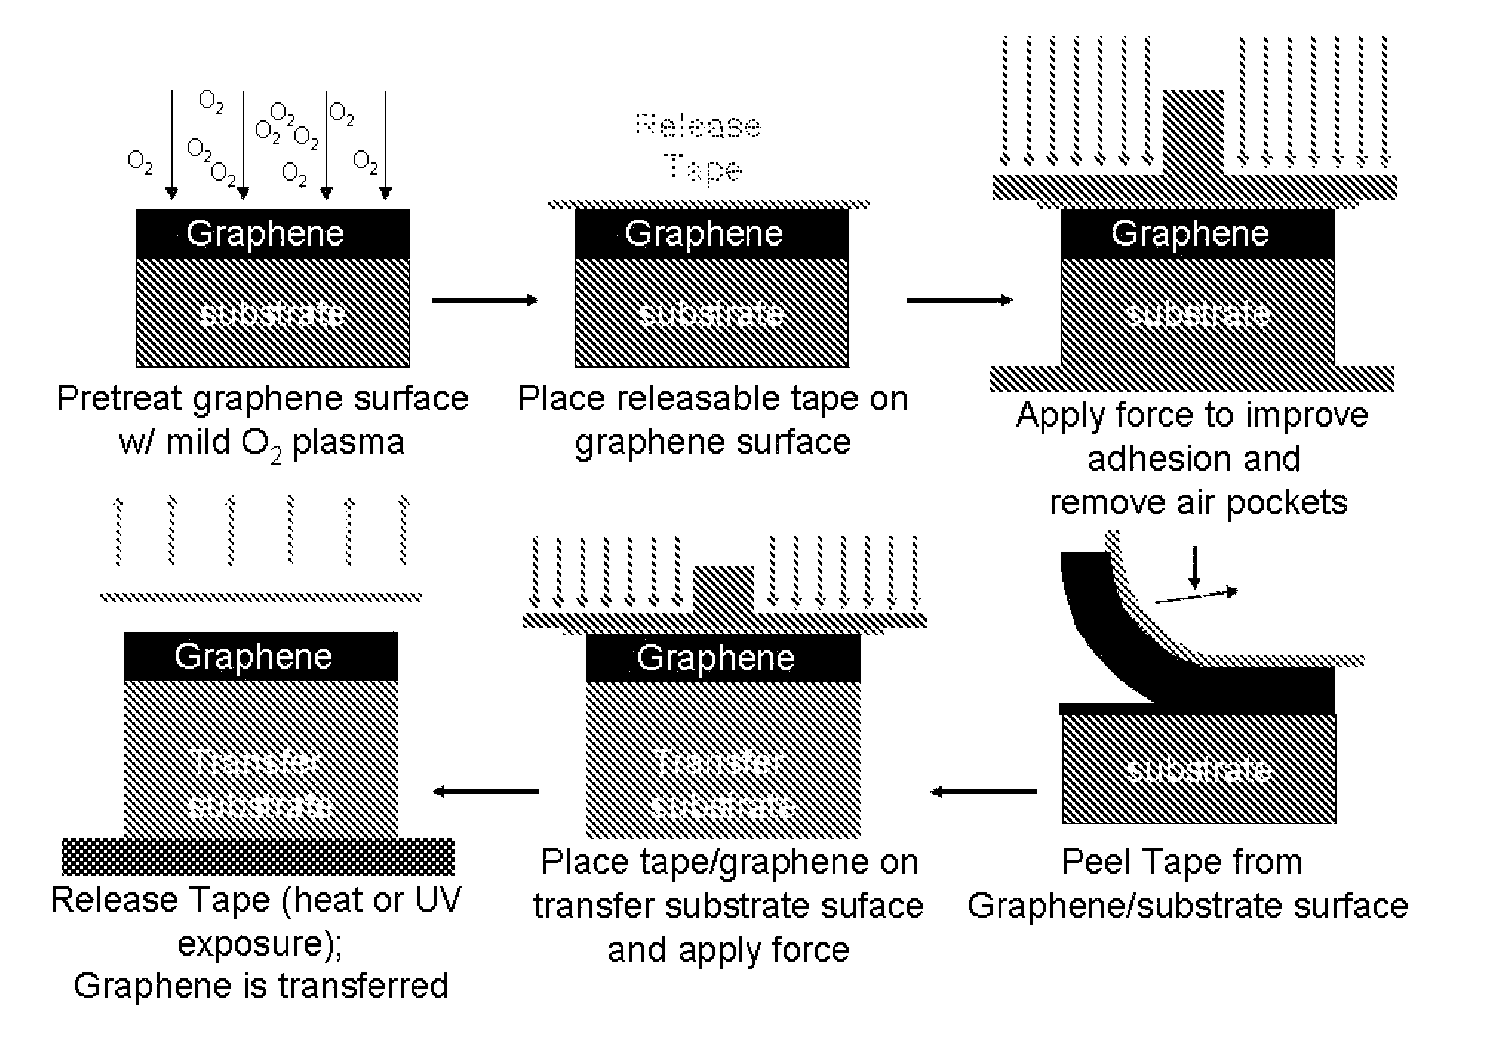 Method for the reduction of graphene film thickness and the removal and transfer of epitaxial graphene films from SiC substrates